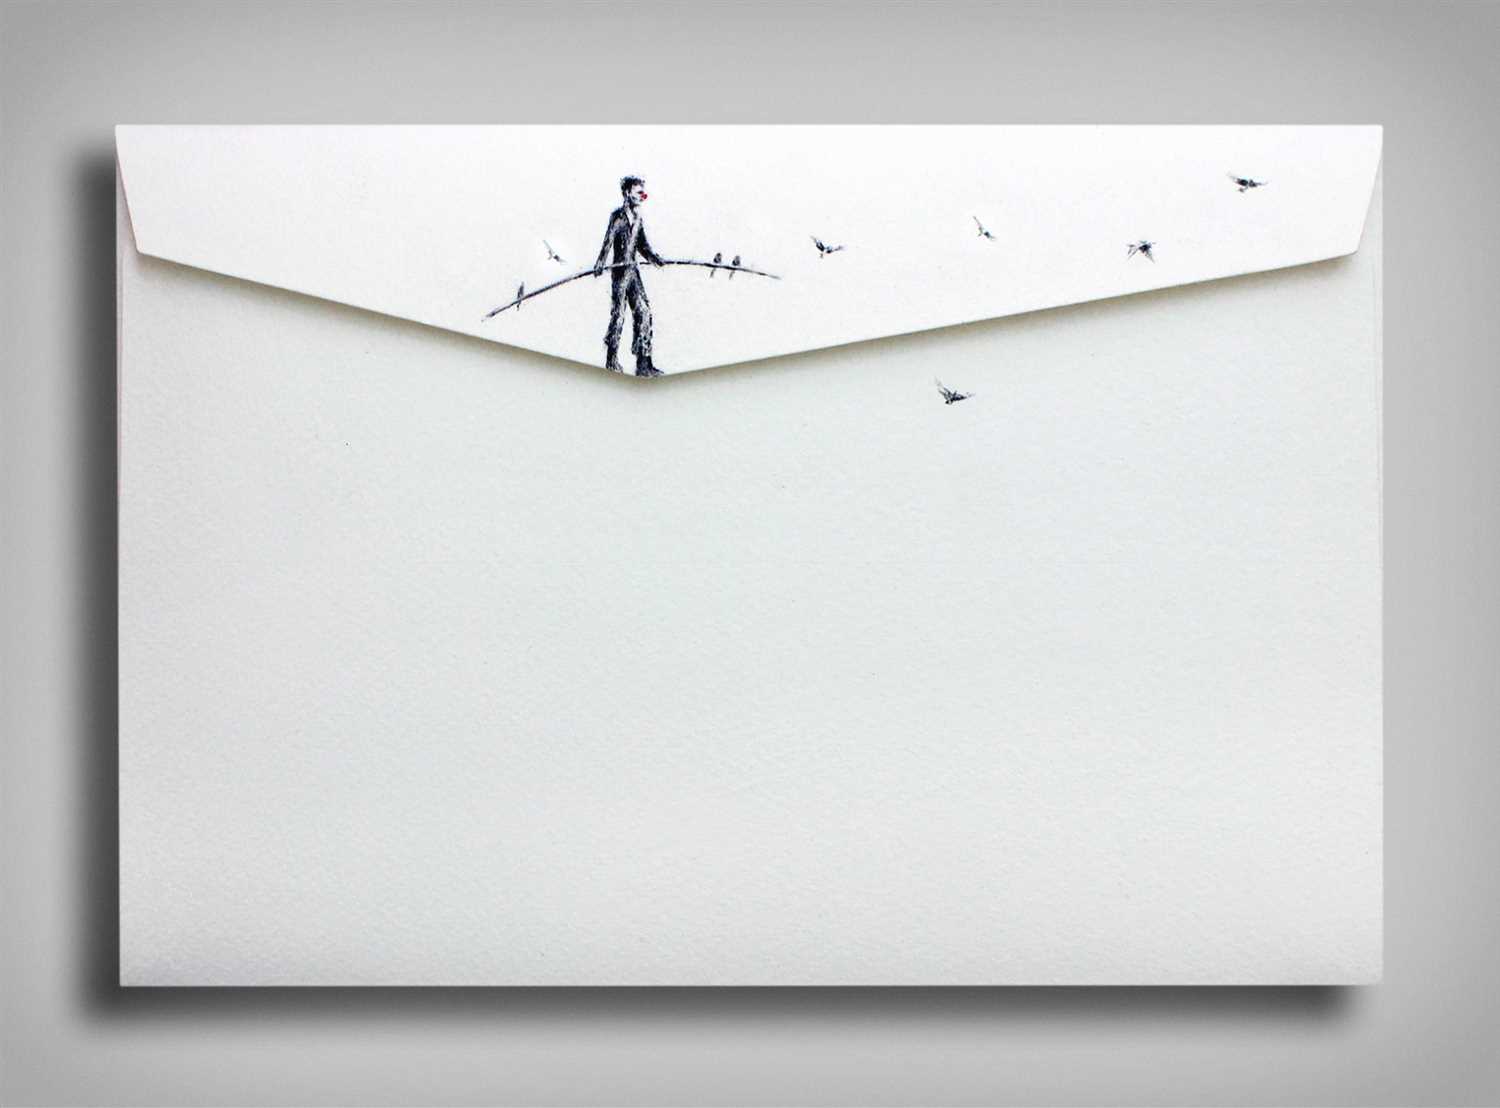 Lot 430 - Pejac (Spanish b.1977), 'Love Letter (Special Edition)', 2018, hand embellished